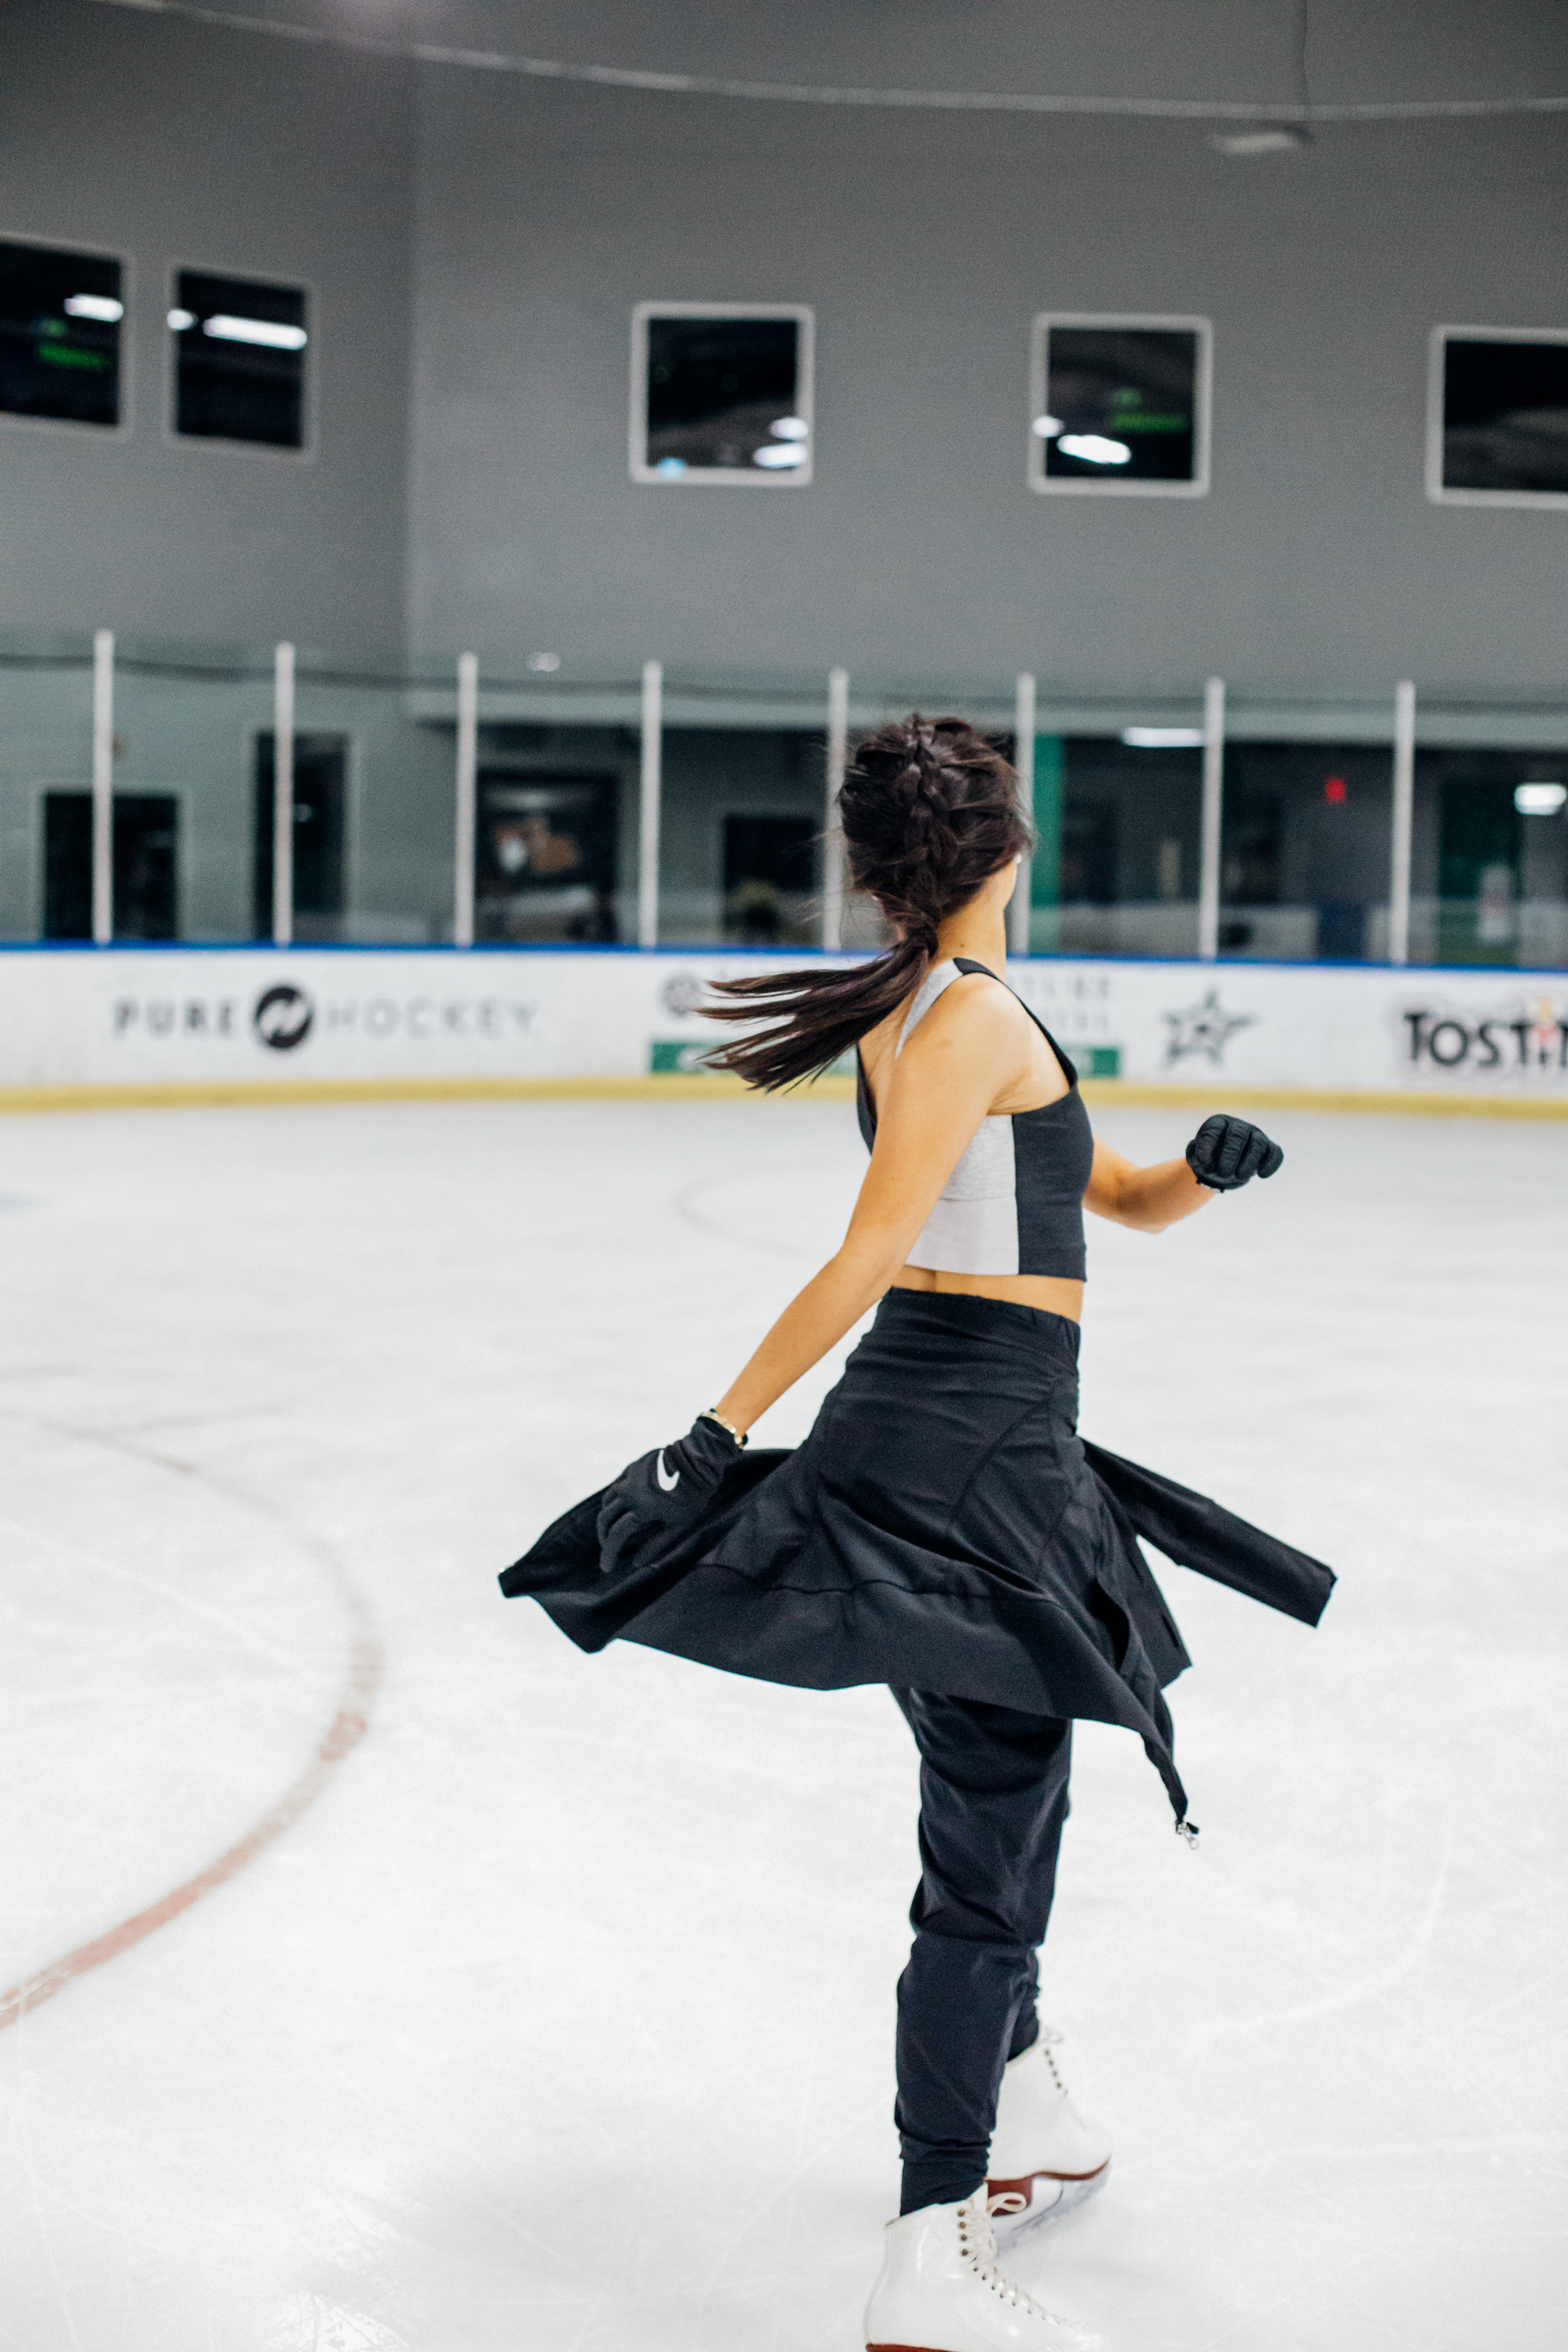 Ice skating lessons in Plano, Texas with blogger Hoang-Kim Cung